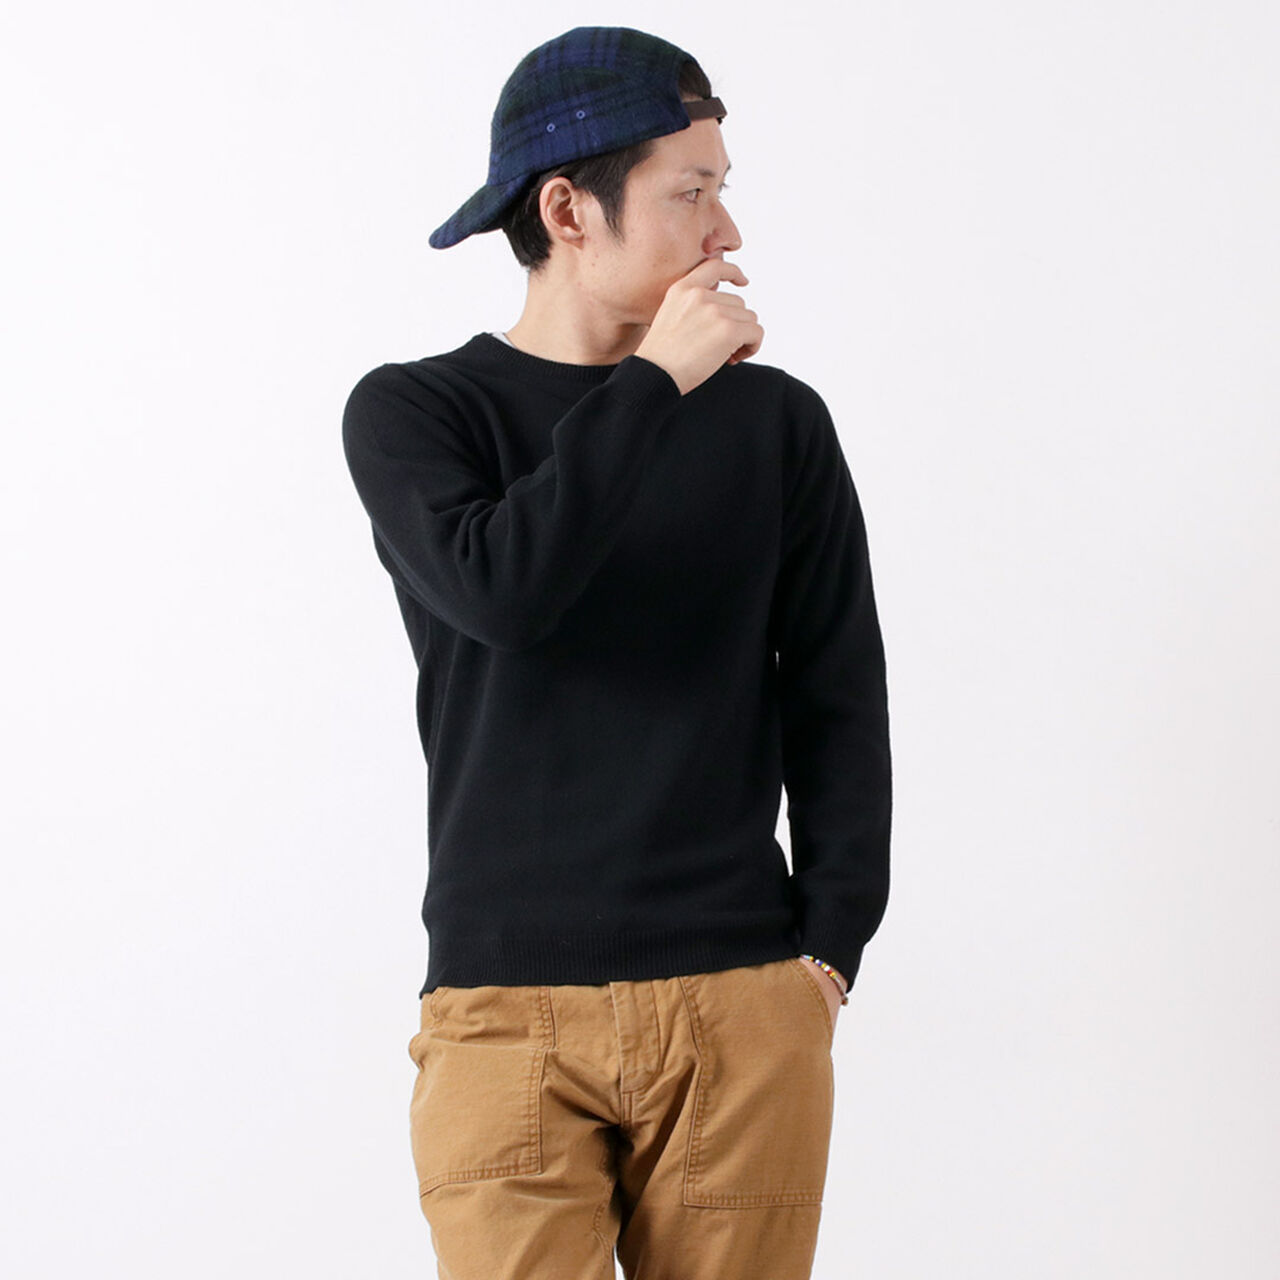 Lambswool crew neck knit,Black, large image number 0